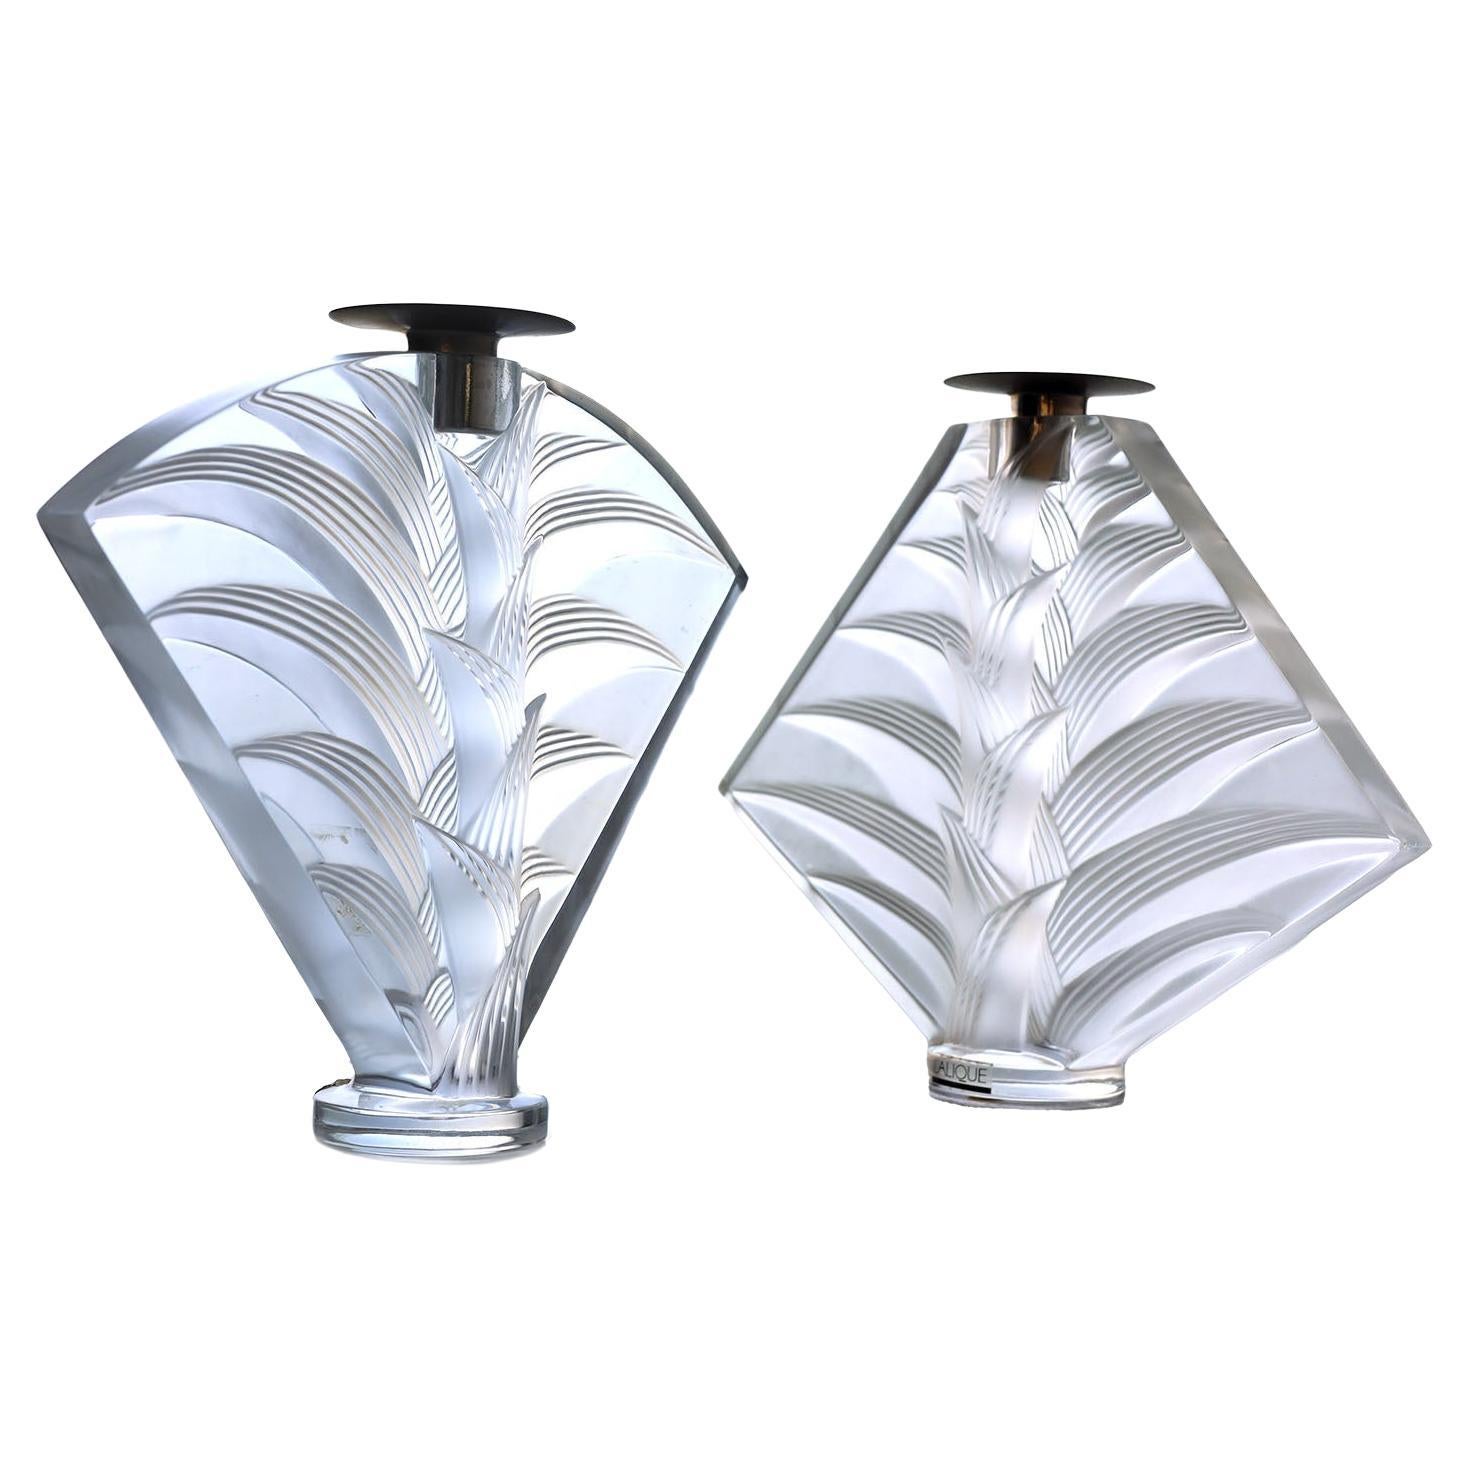 Lalique Pair of " Ravelana" Candle Holders